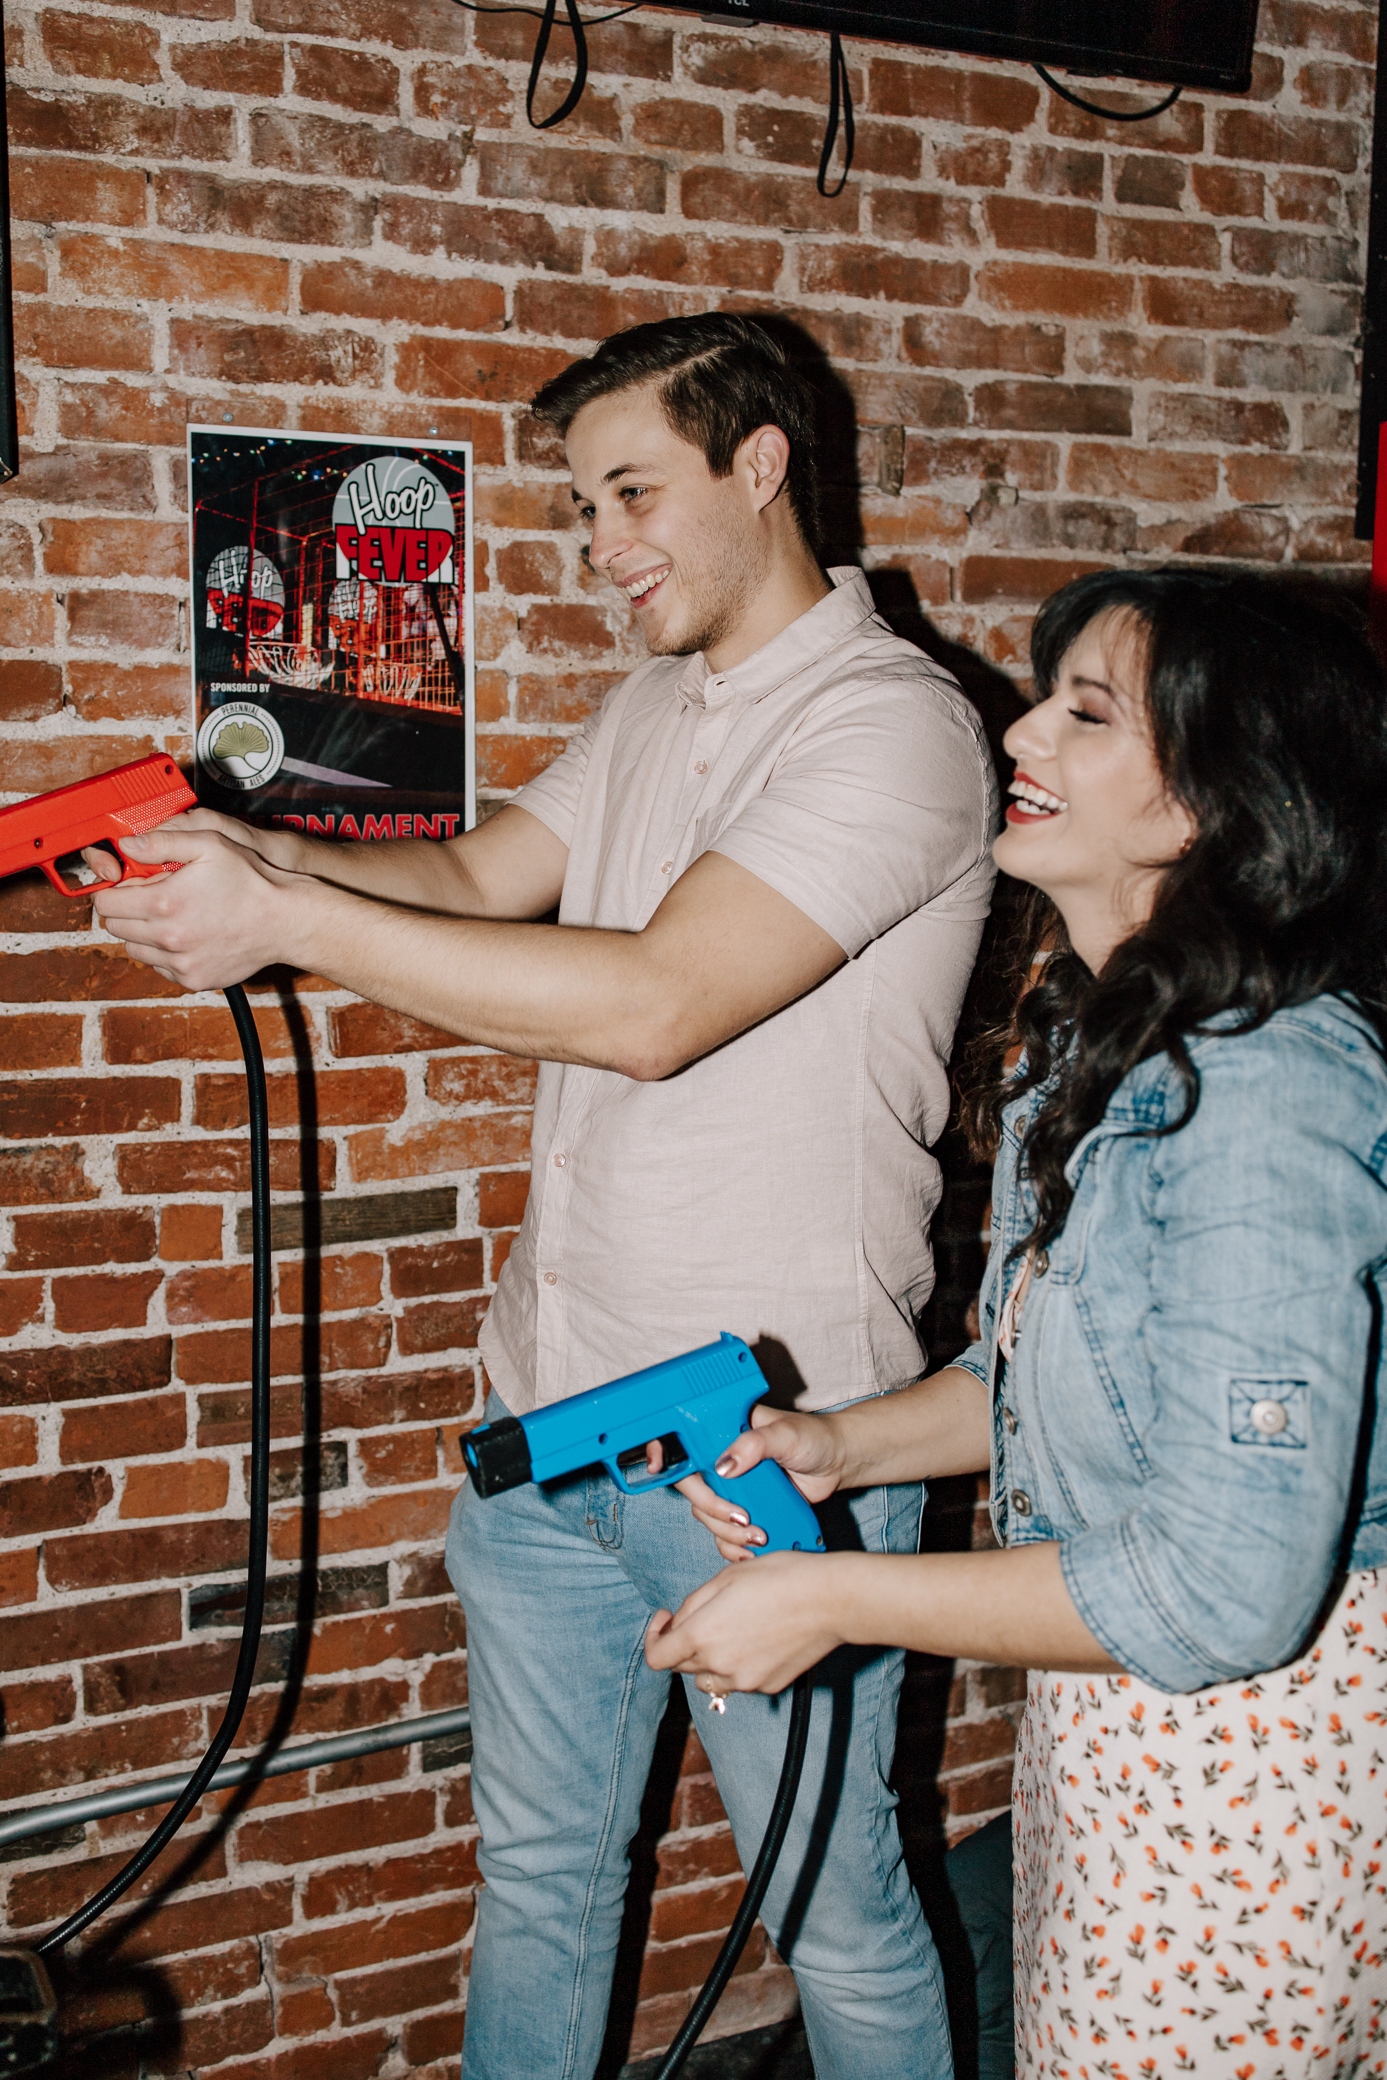 A couple laughs while holding toy guns while playing an arcade game.